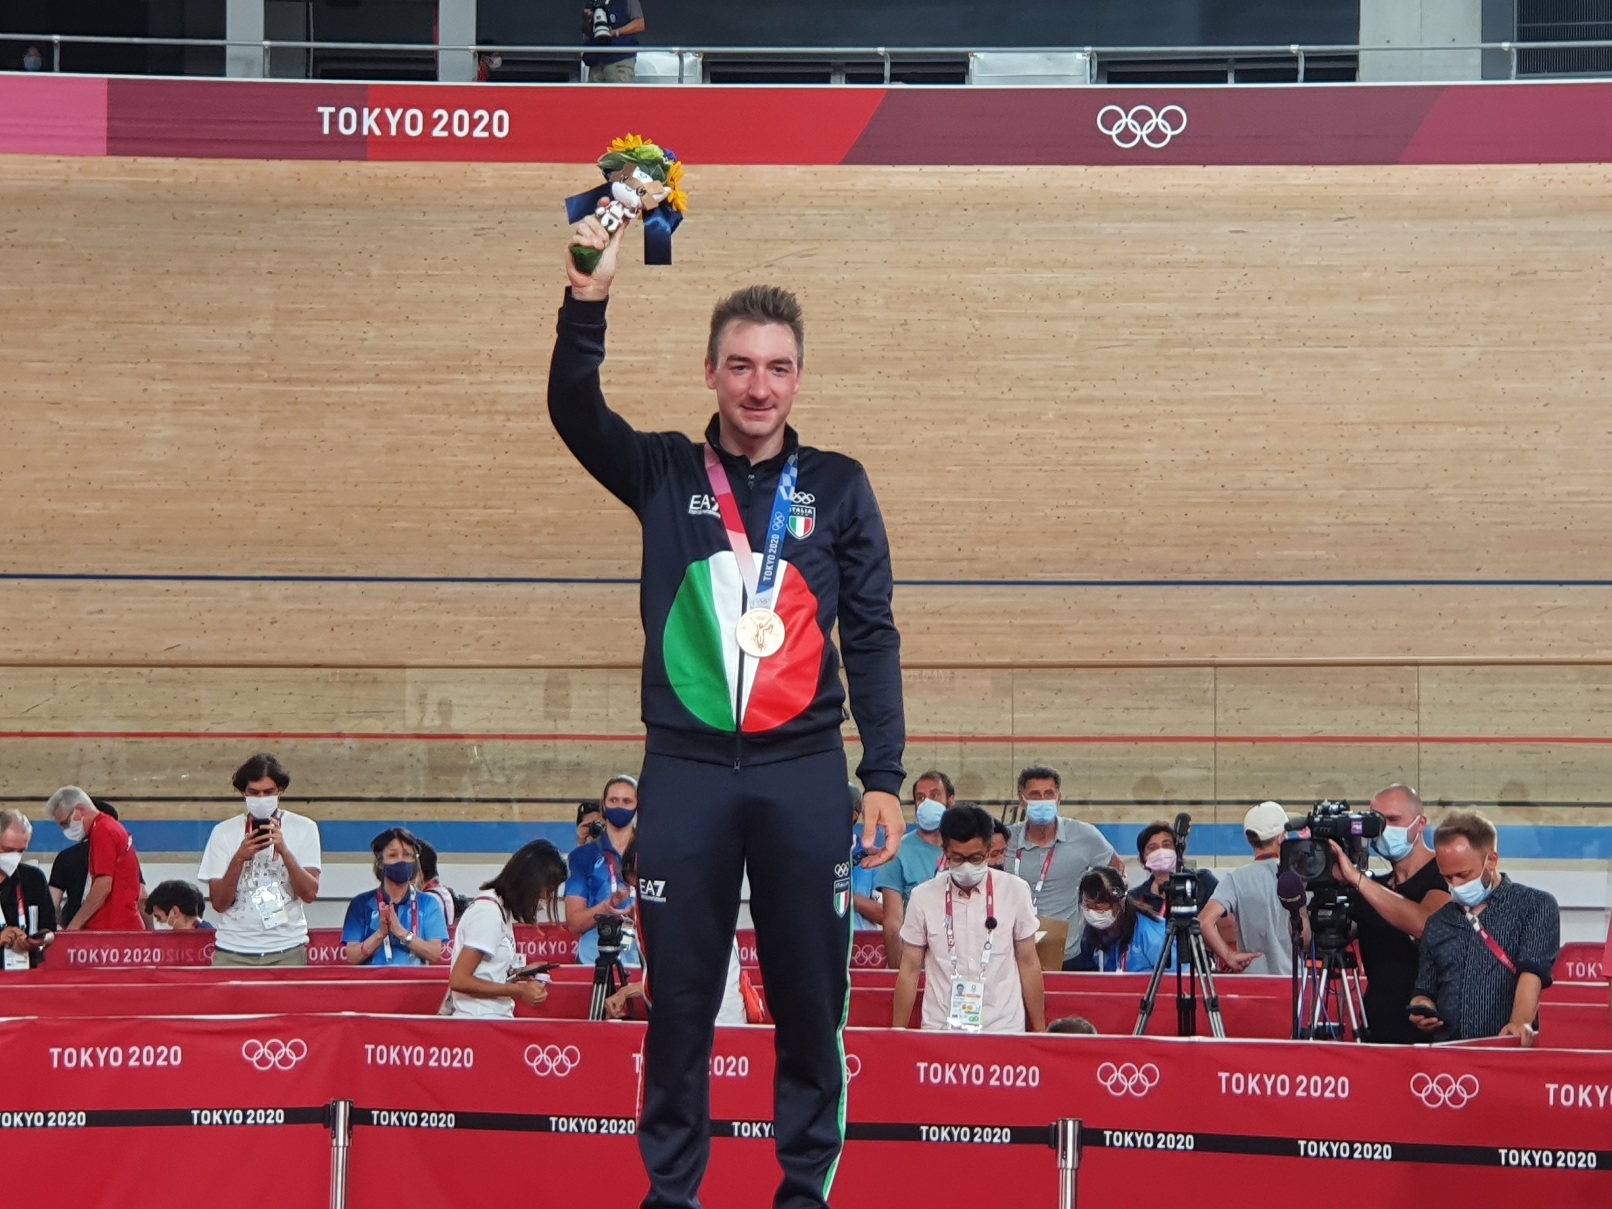 Elia Viviani bronze in the Omnium: Italy's 34th medal comes from the flag bearer